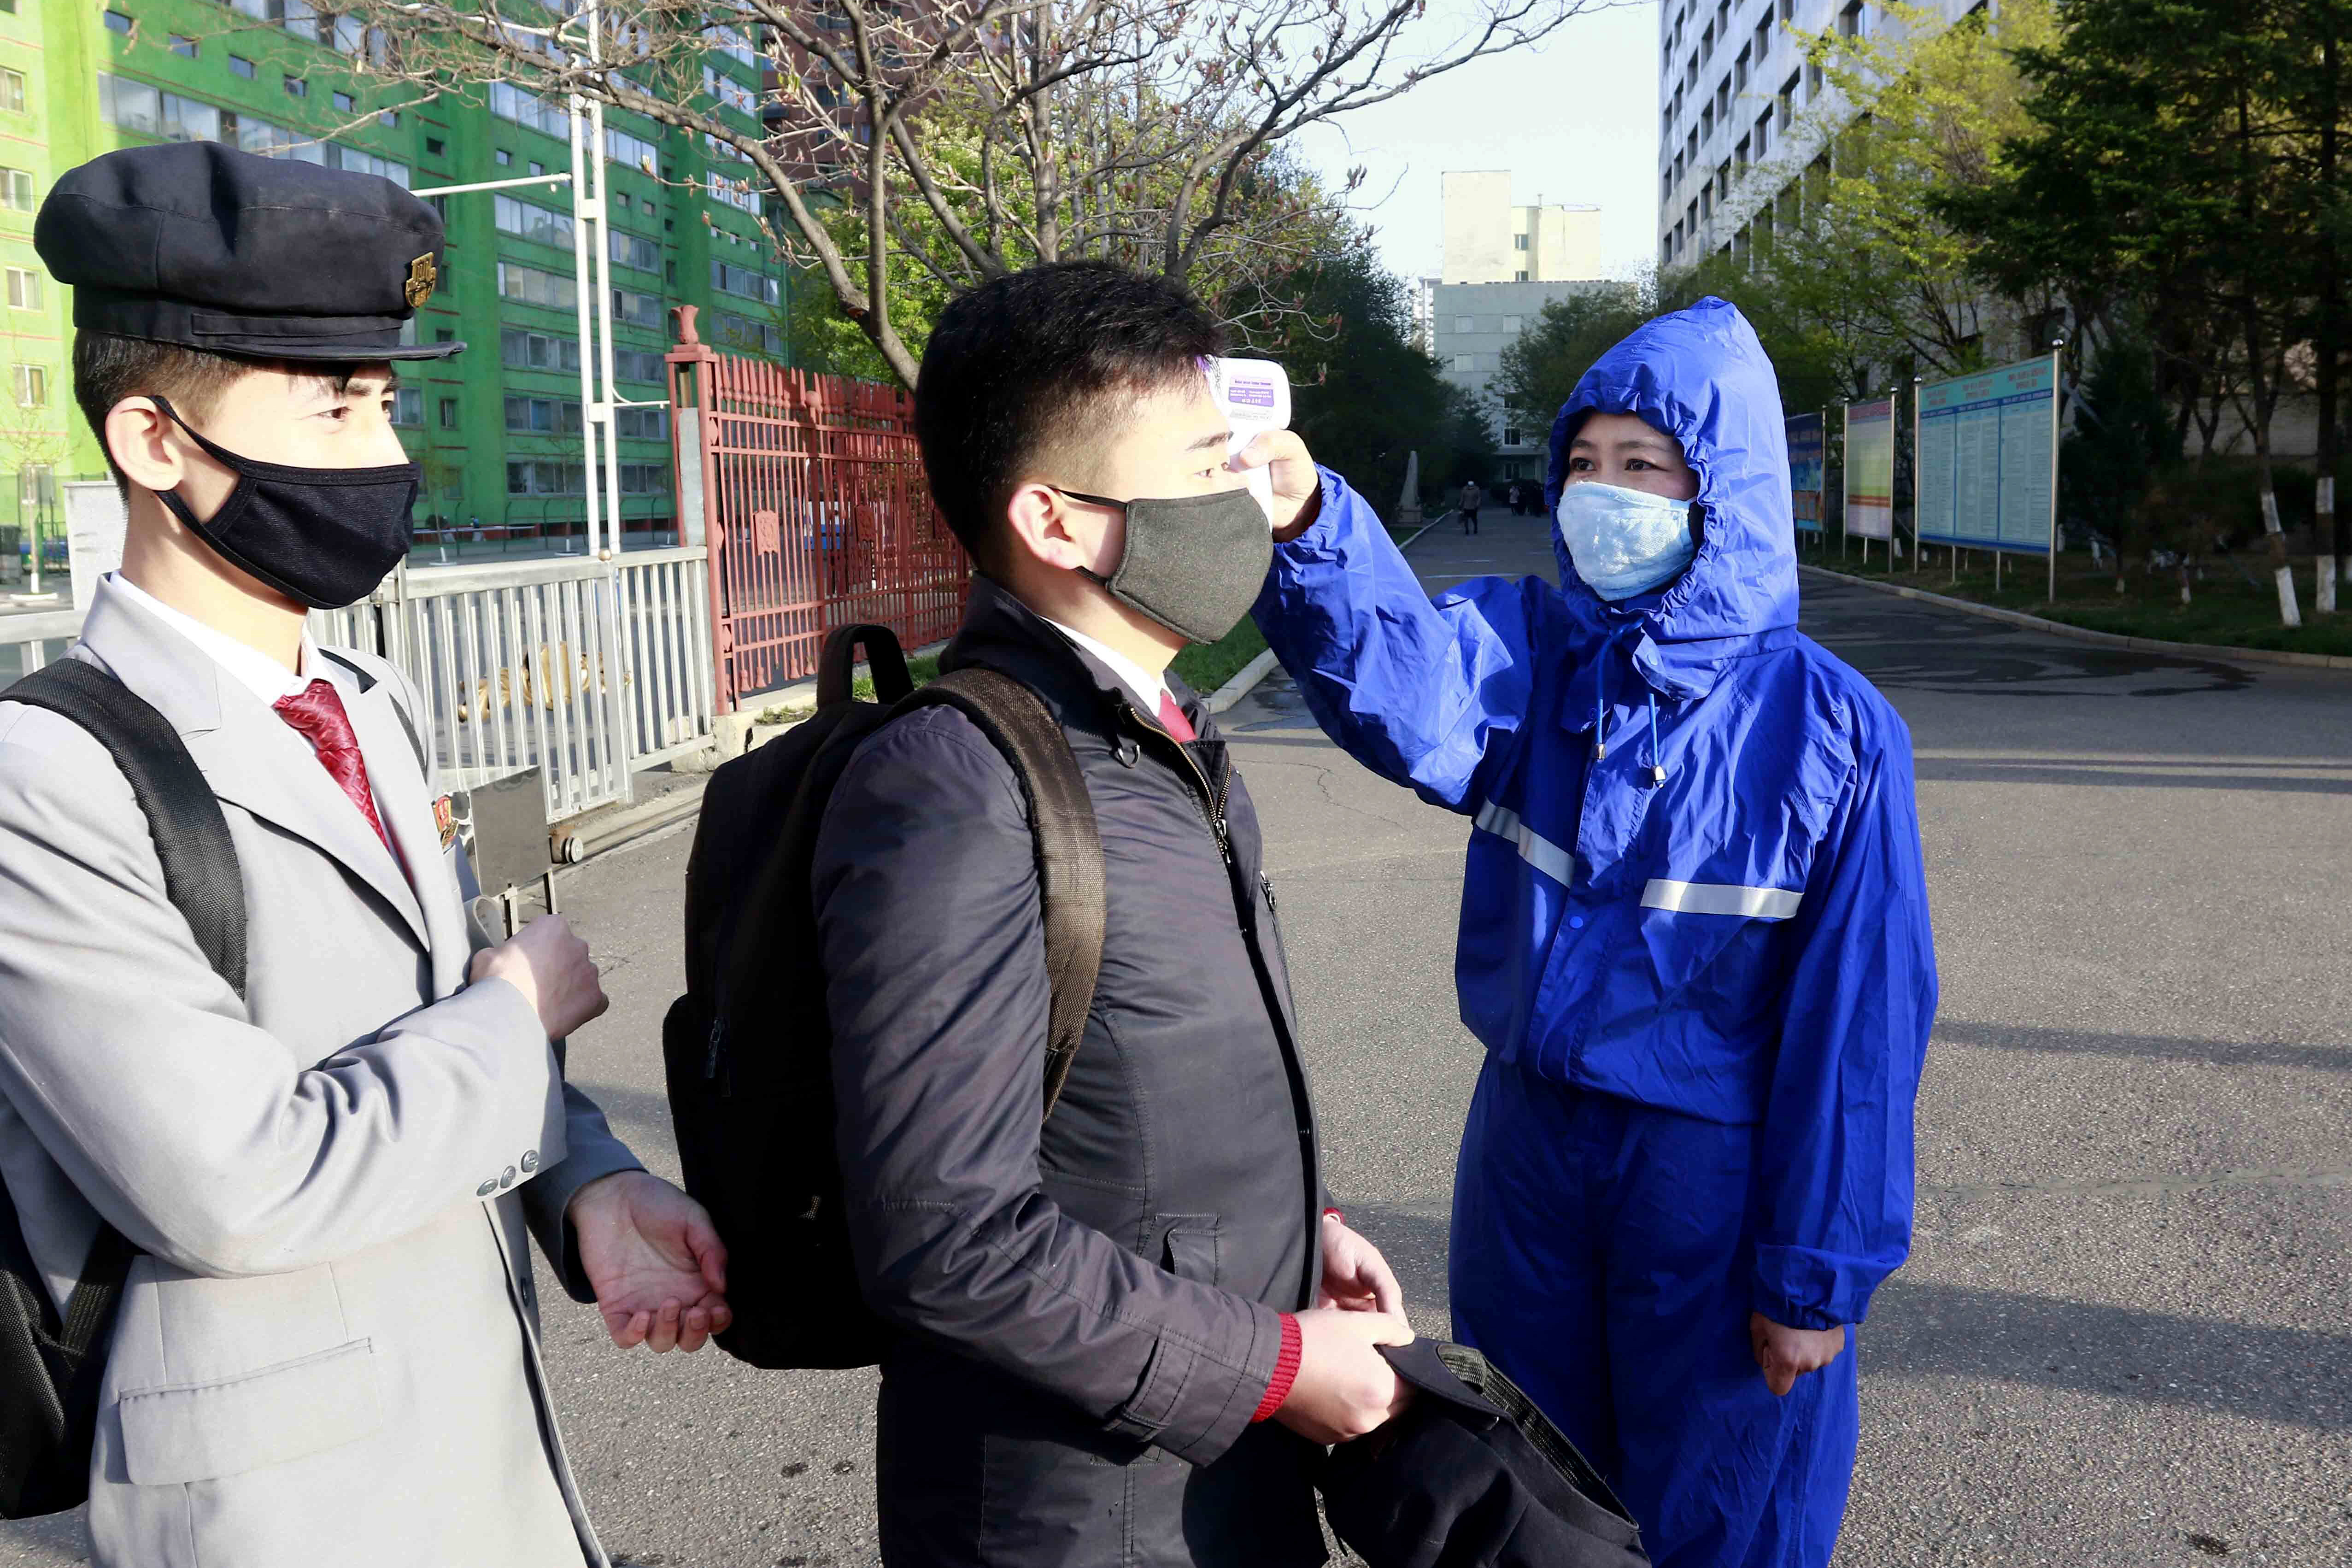 A student wearing a face mask has his temperature checked as a precaution against a new coronavirus as their university reopened following vacation, at Kim Chaek University of Technology in Pyongyang, Wednesday, April 22, 2020. (AP Photo/Jon Chol Jin)